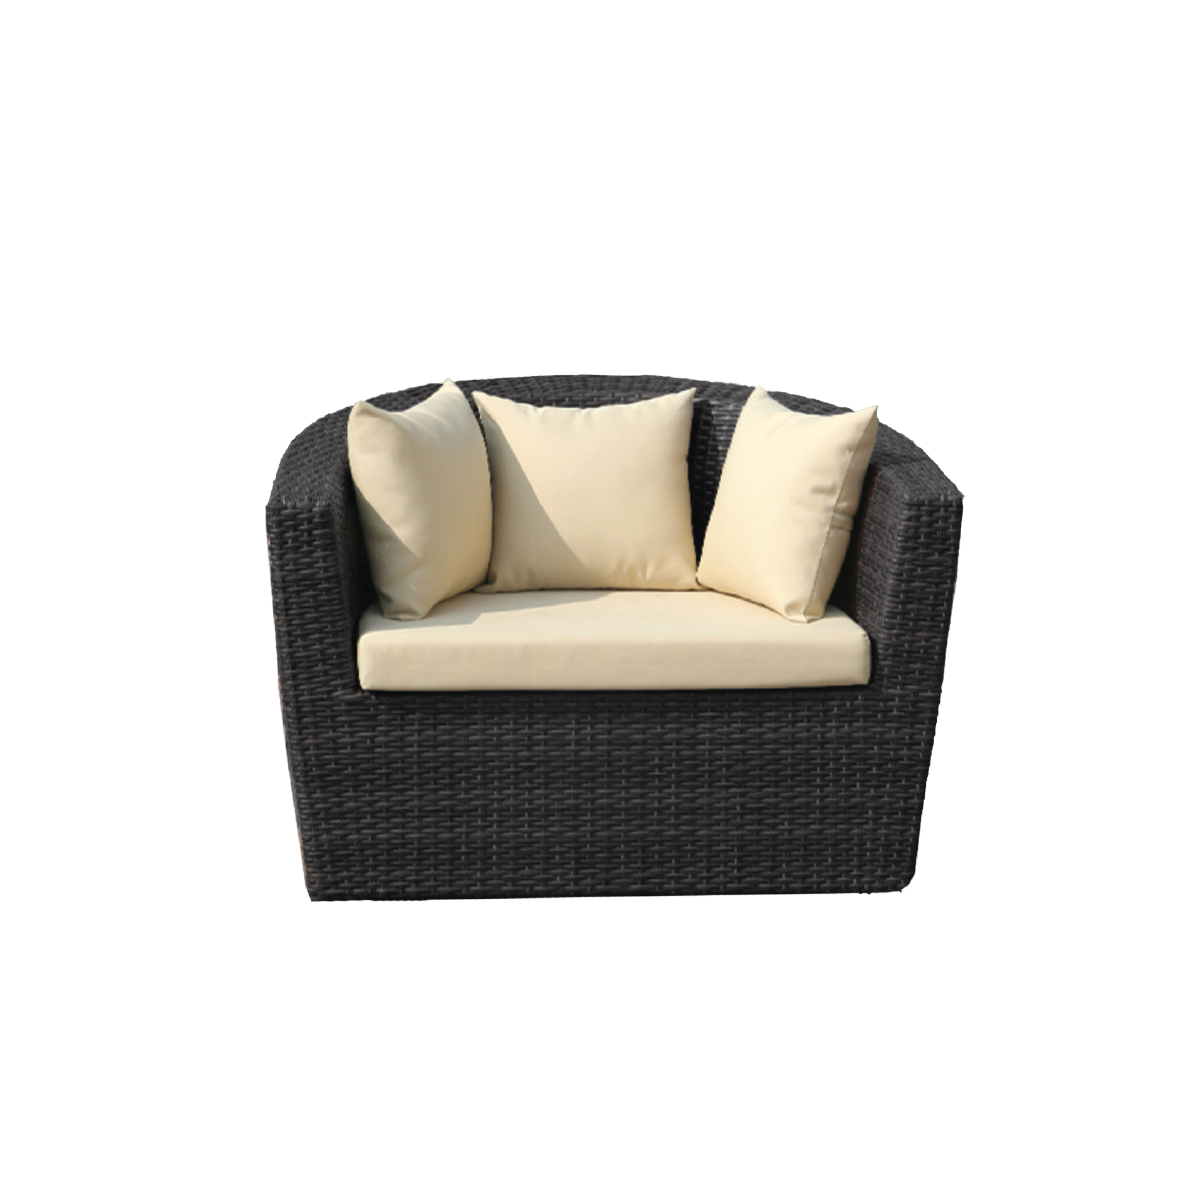 SOFA CHAIRS AND OTTOMAN WITH BASE CUSHION <br>(VL 205)